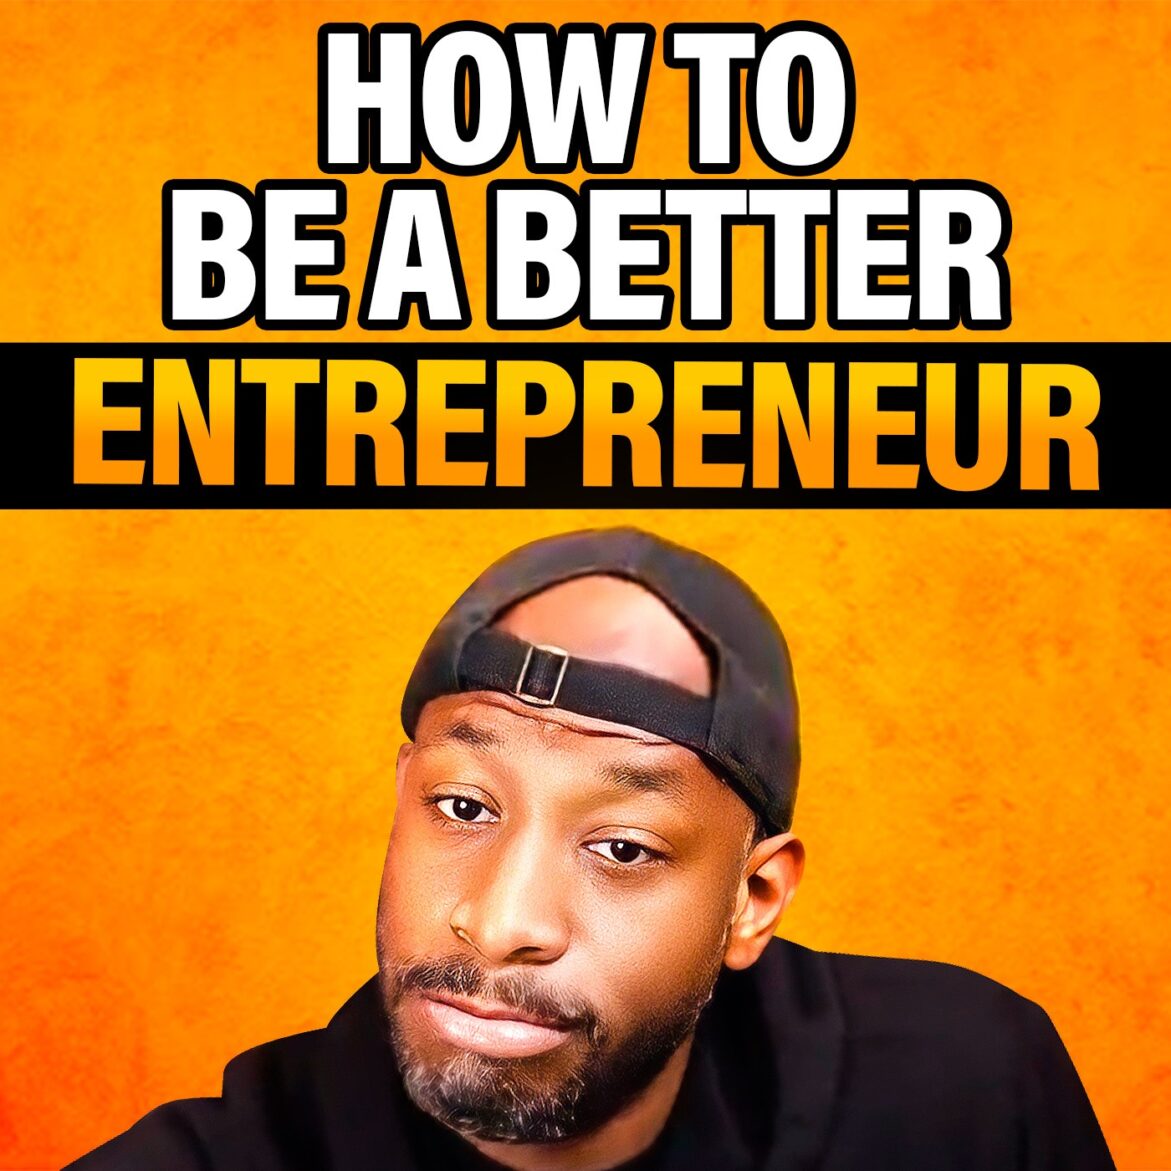 Black Podcasting - Making More Money Requires Being A Better Entrepreneur